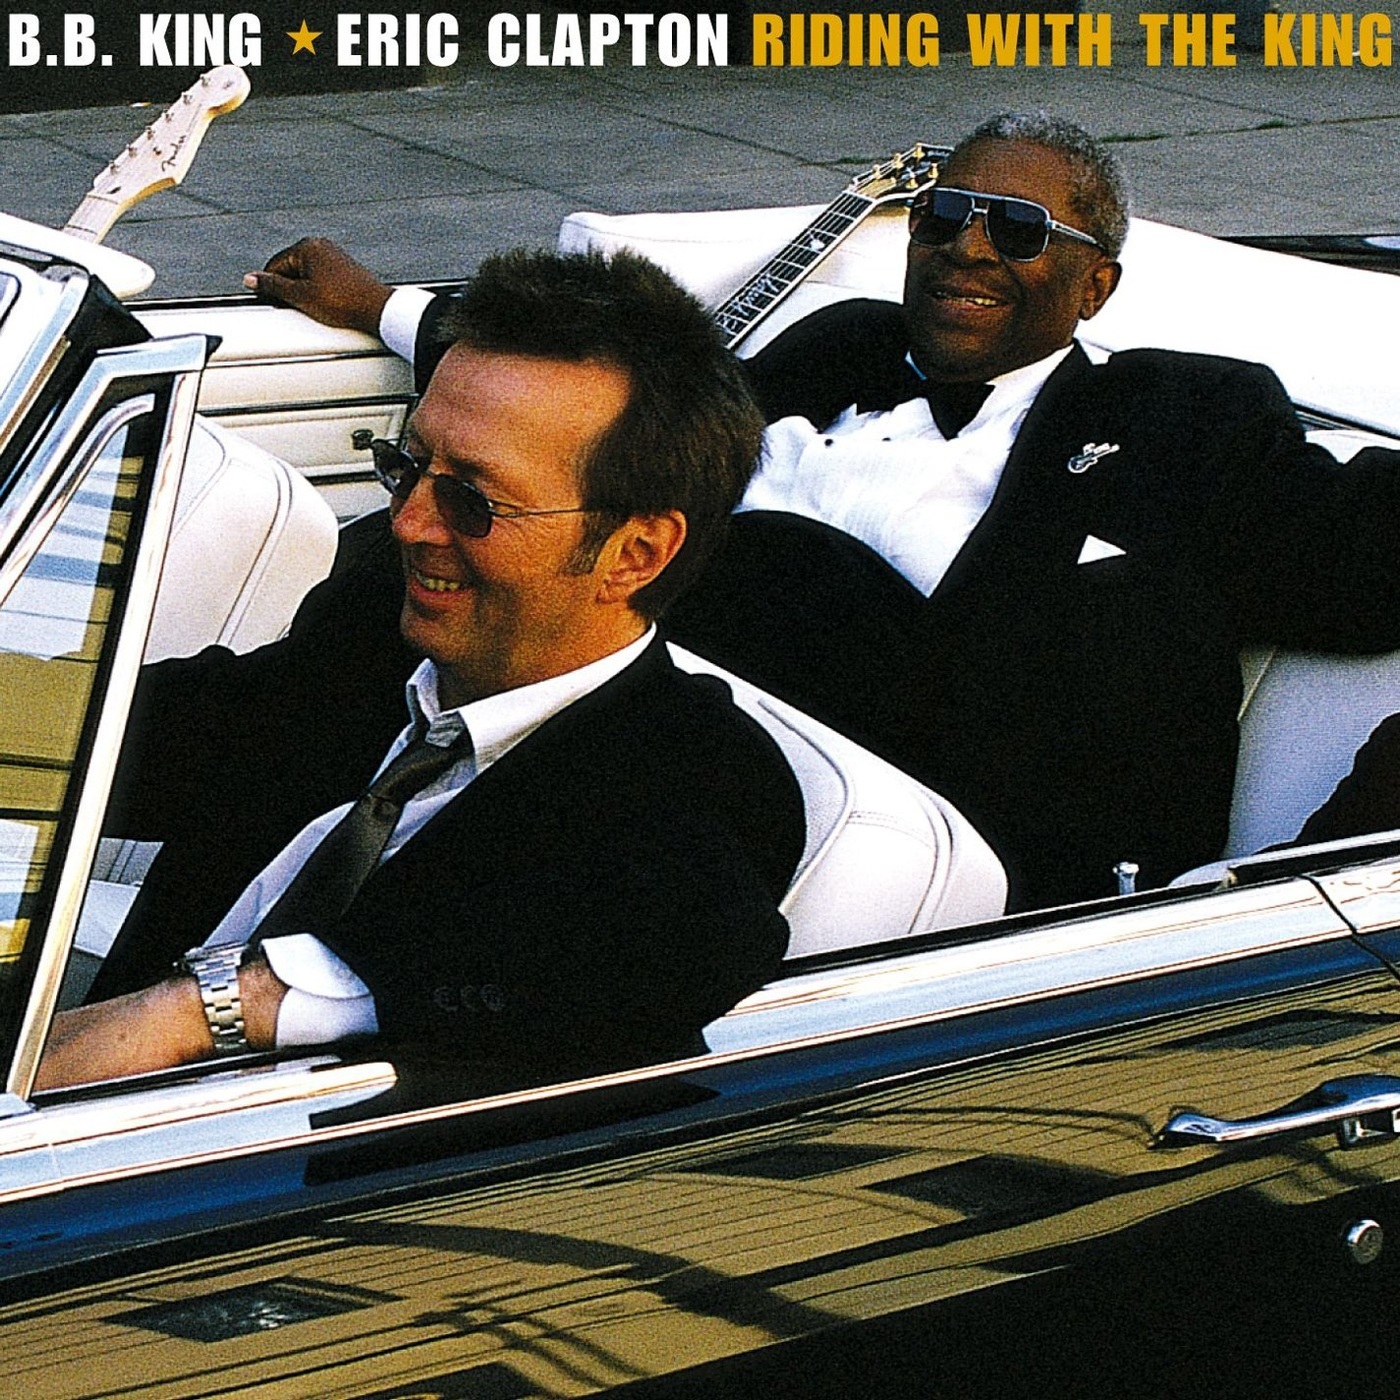 B.B. King & Eric Clapton – Riding with the King (20th Anniversary Deluxe Edition) (2000/2020) [FLAC 24bit/96kHz]